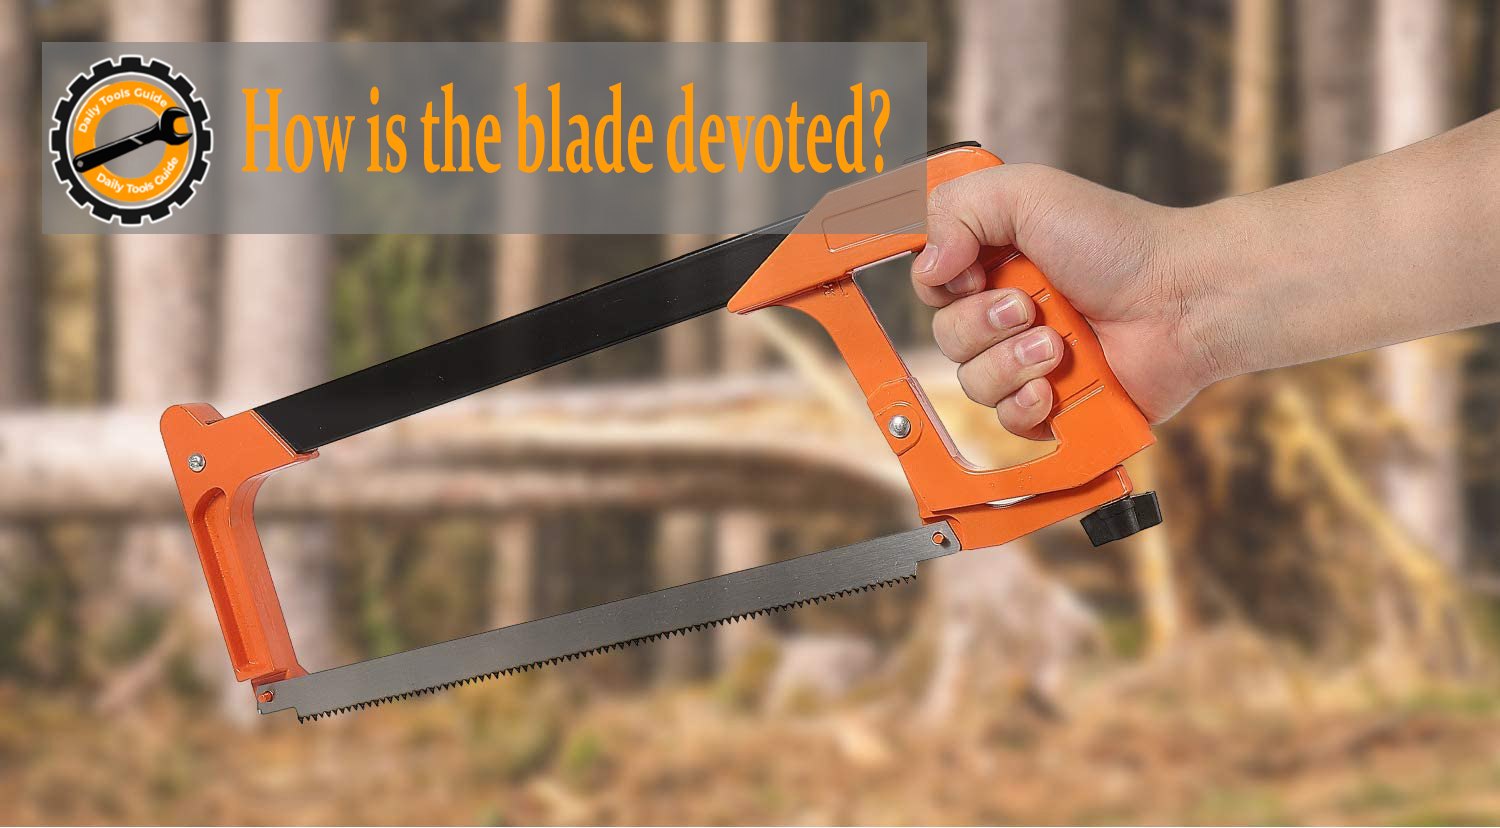 How is the blade devoted?